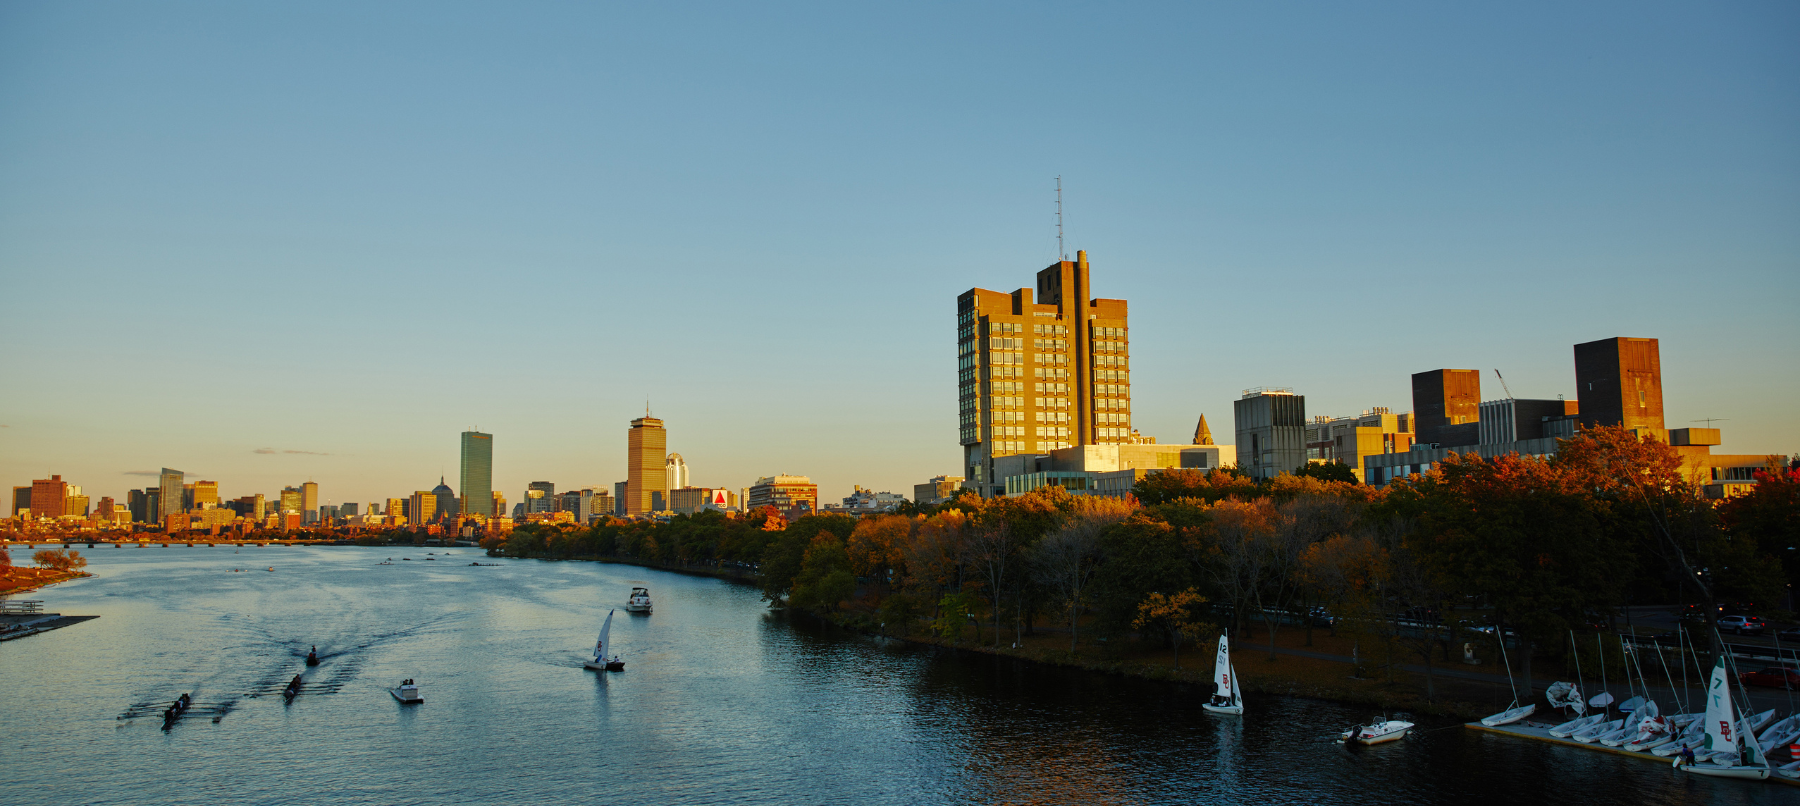 A view of the Charles River and Boston University campus in golden, late afternoon sunlight. There are several boats on the river and you can see many BU campus buildings and the Boston skyline is in the background